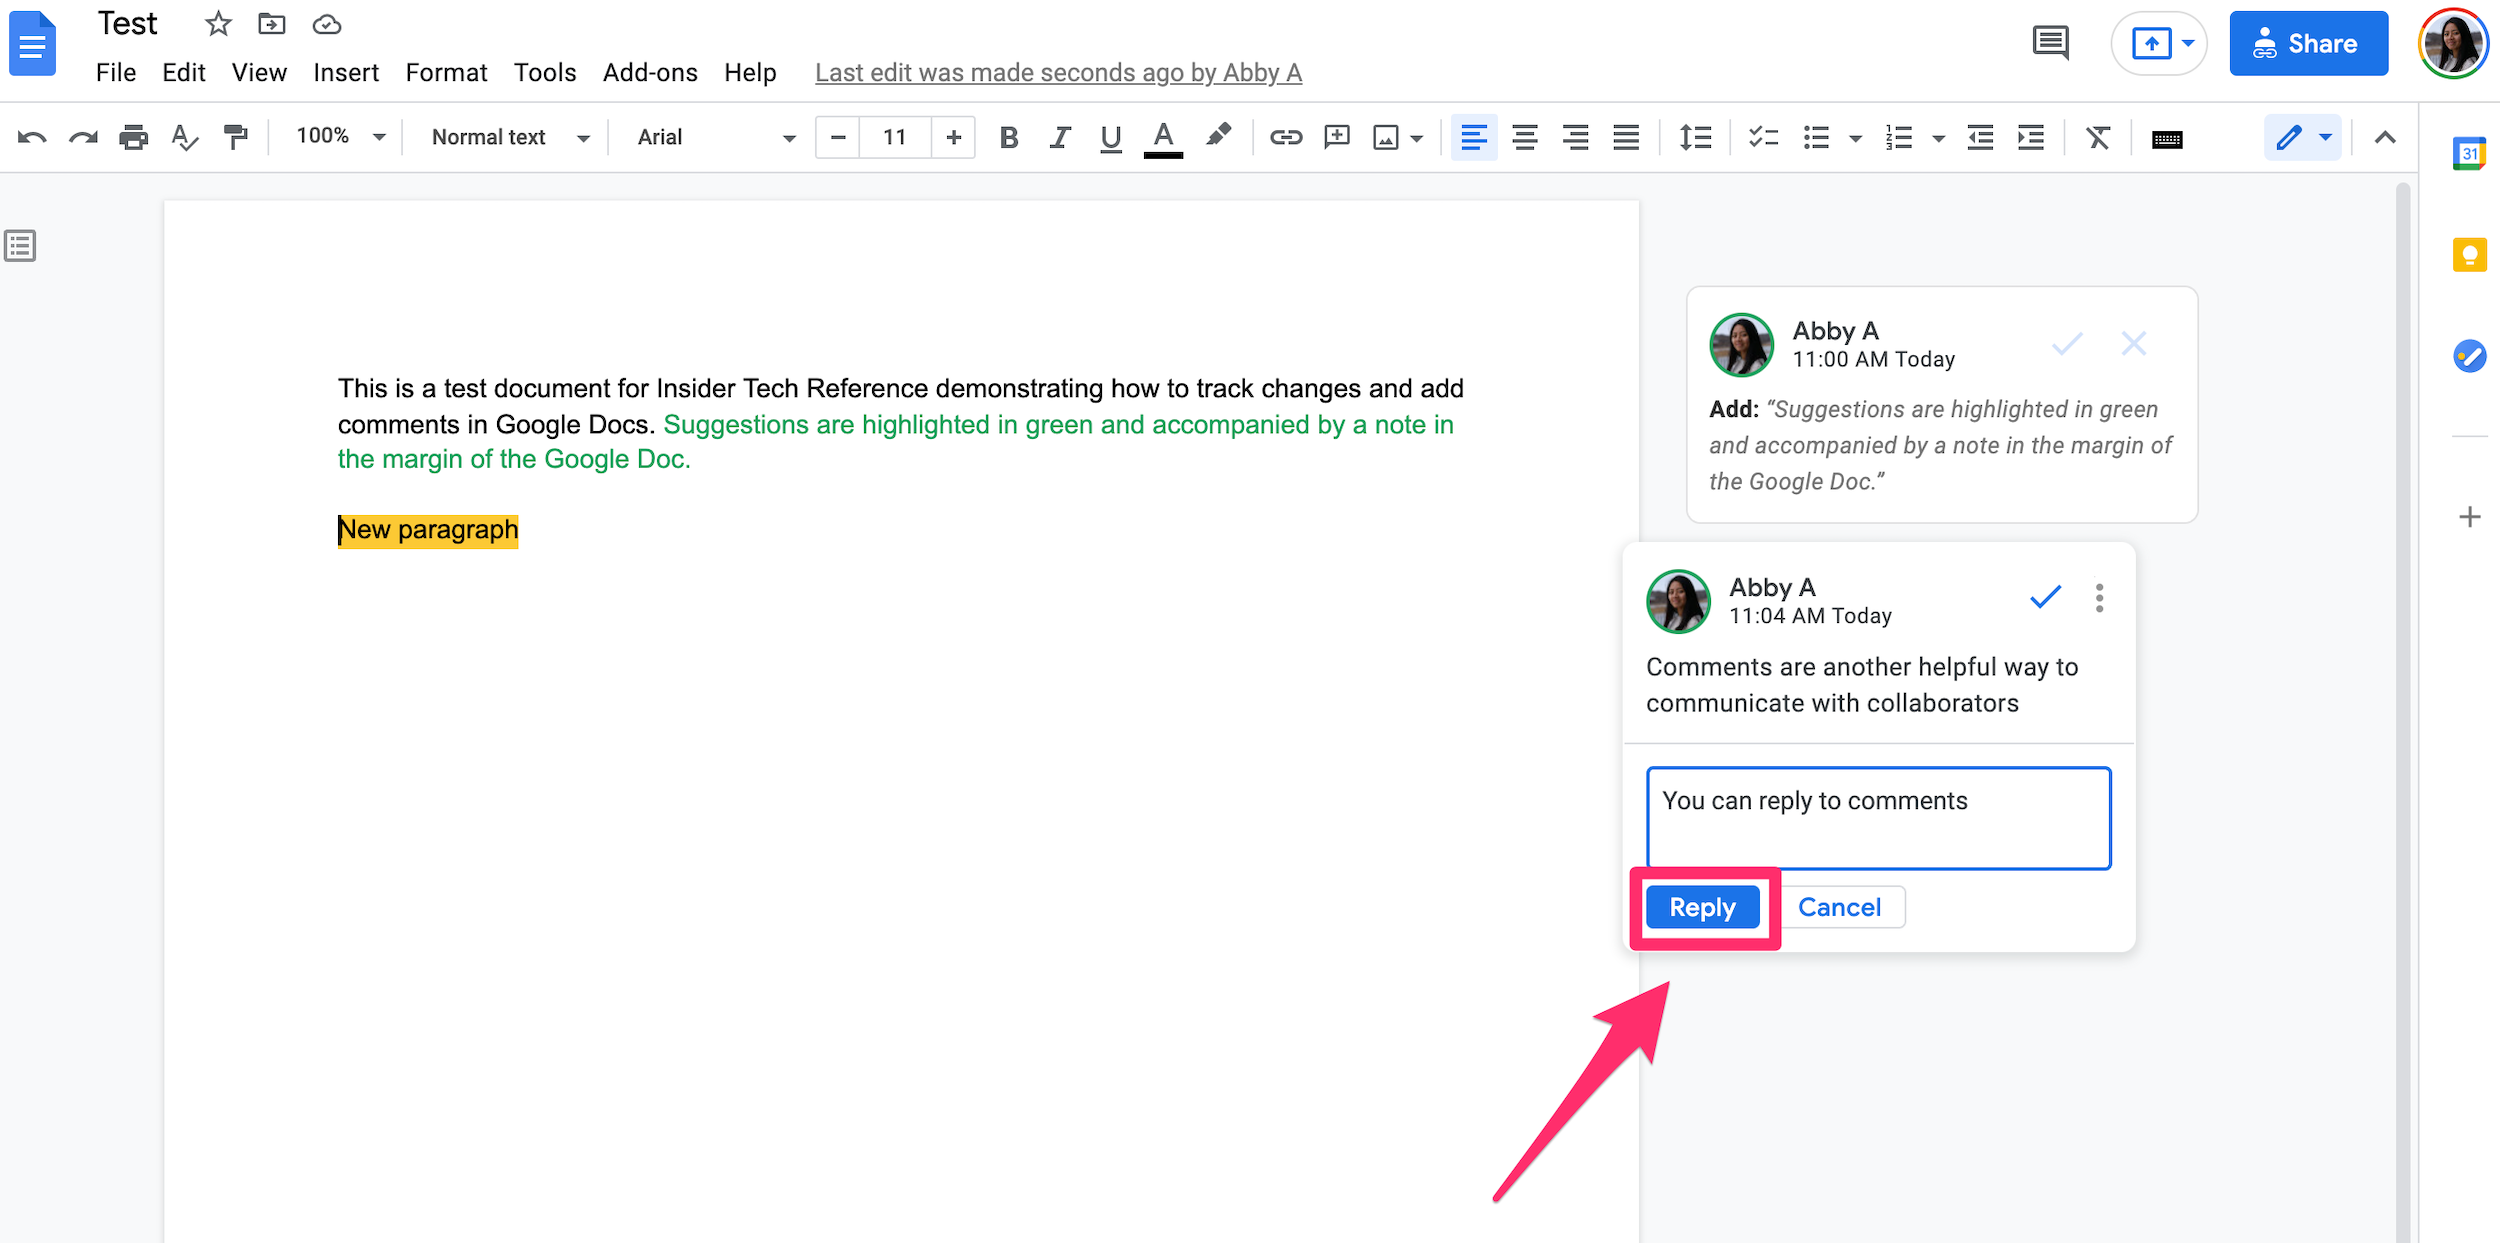 How to use Google Docs comments